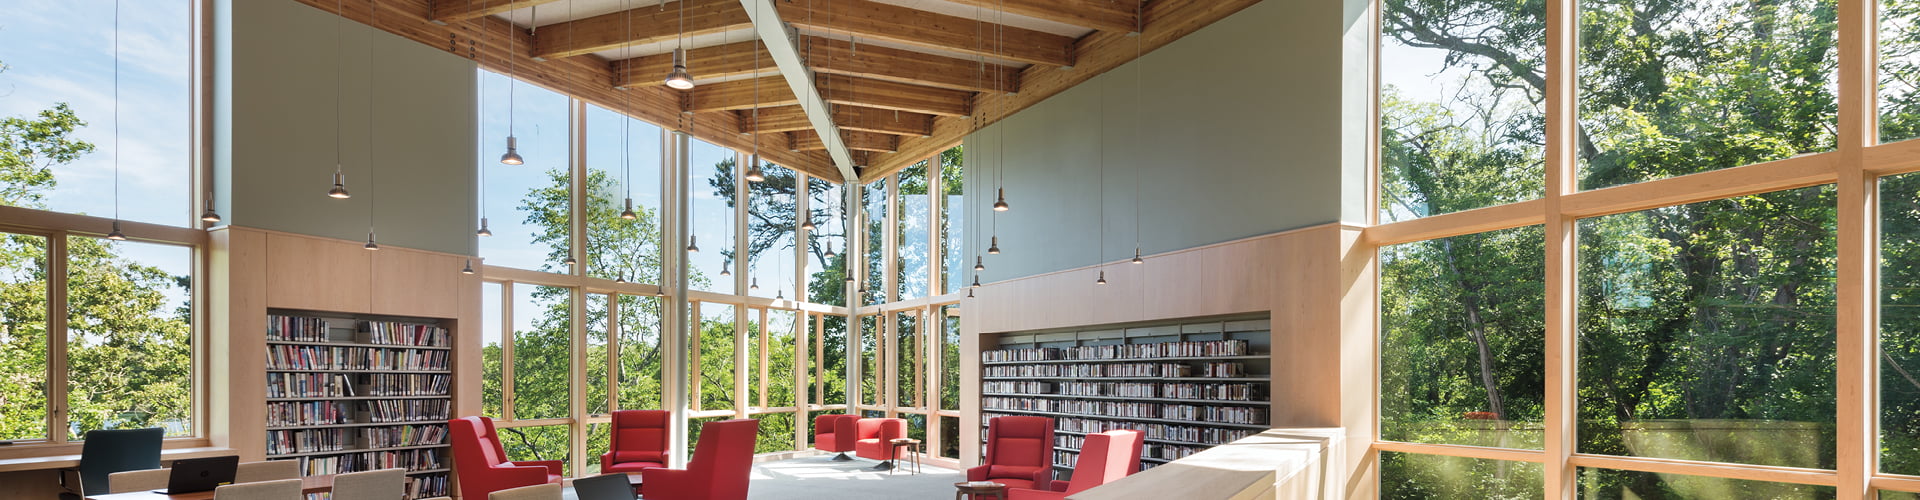 Eastham public library with red chairs and window walls